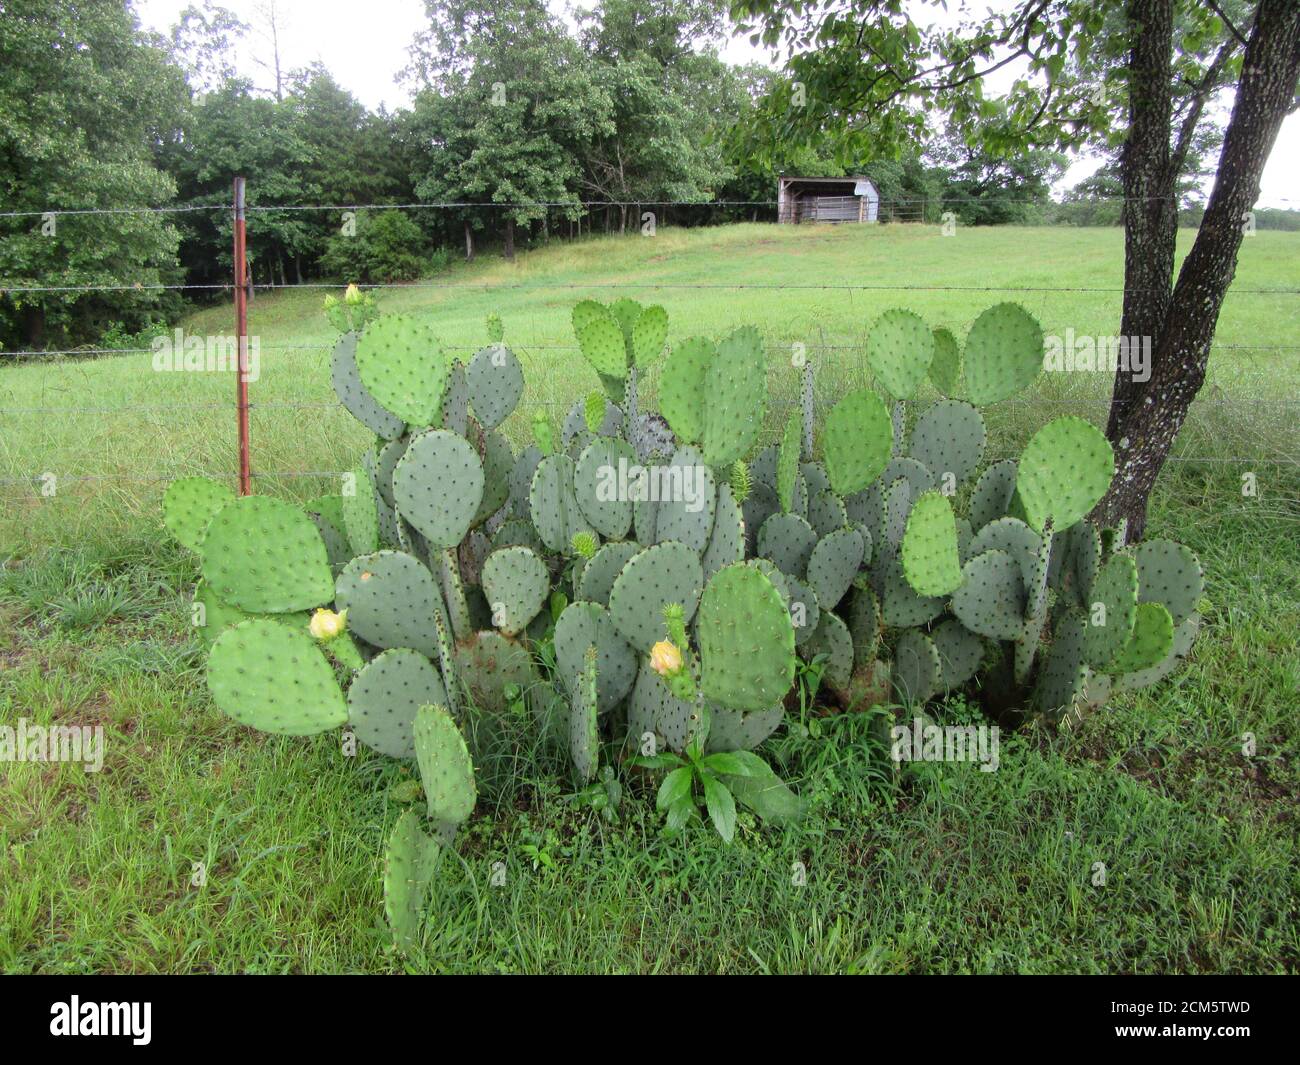 A patch of prickly pear cactus in a rural setting Stock Photo